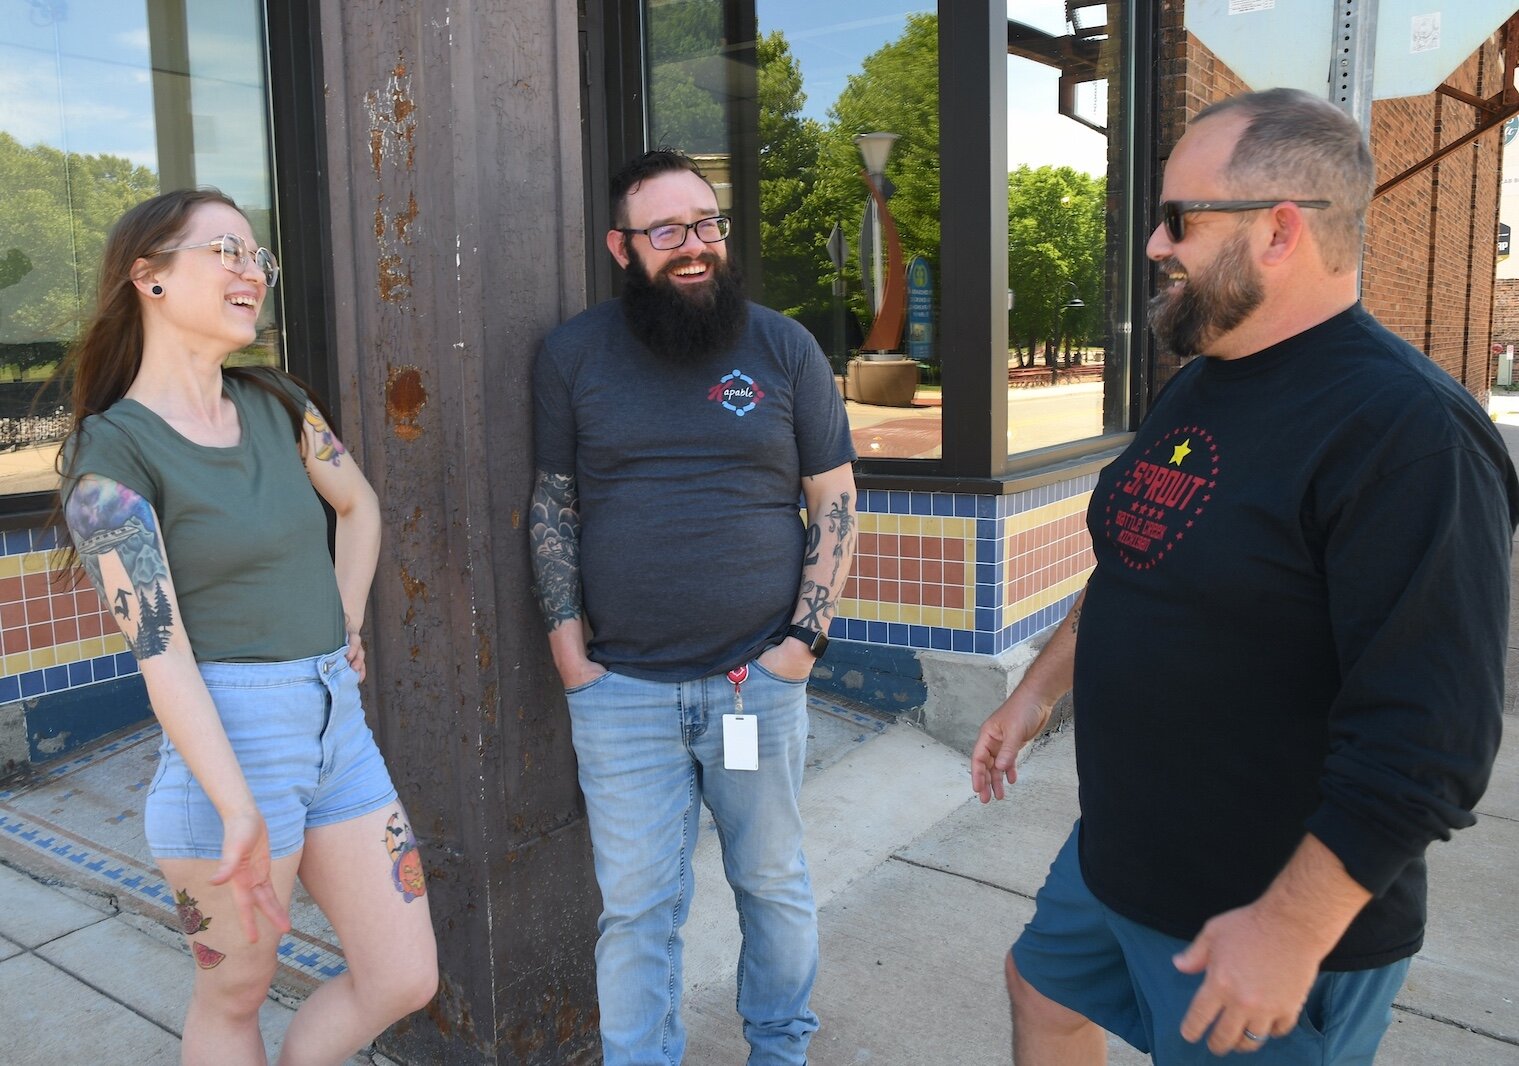 Talking informally in front of the future location a local food co-op in downtown Battle Creek are, from left, Rachel Ostrander, Jared Kirtley, and Jeremy Andrews.